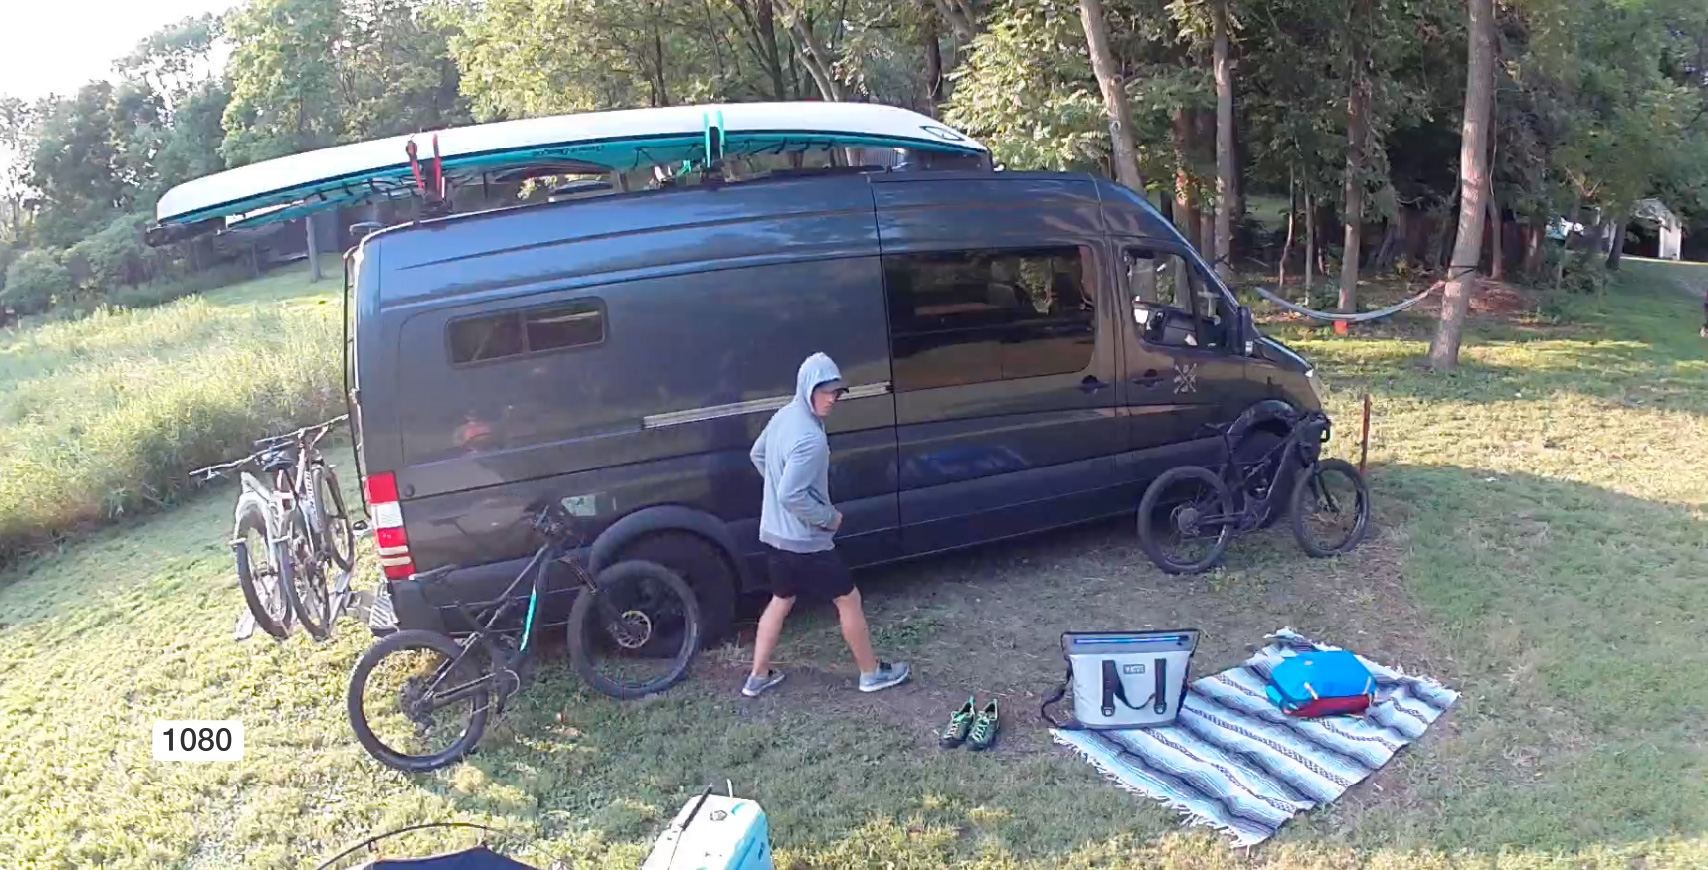 Smart phone displaying crisp 1080p video recording of person creeping outside a camper van